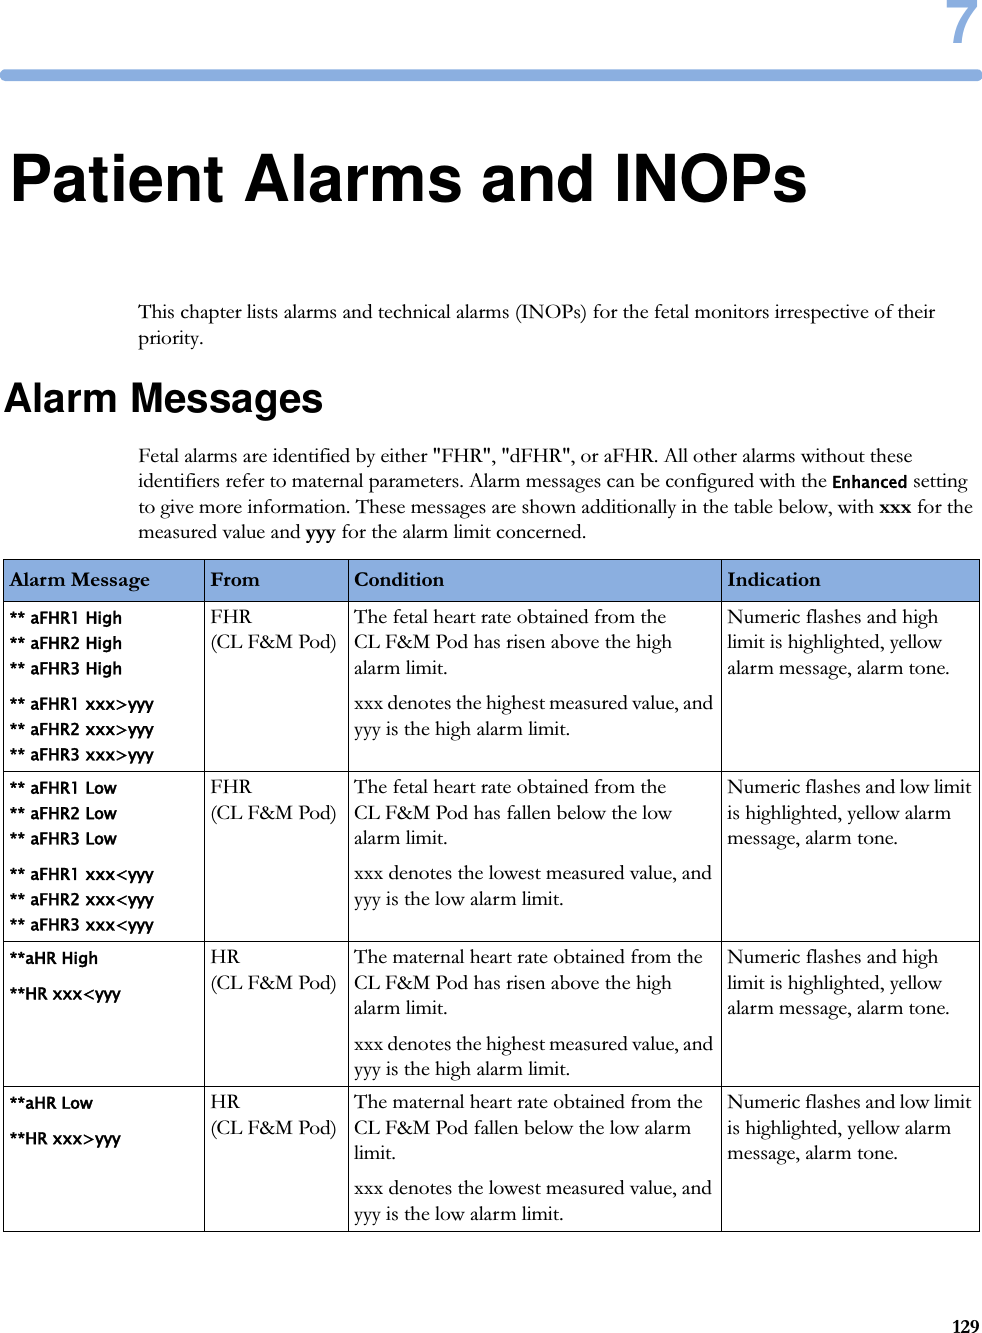 71297Patient Alarms and INOPsThis chapter lists alarms and technical alarms (INOPs) for the fetal monitors irrespective of their priority.Alarm MessagesFetal alarms are identified by either &quot;FHR&quot;, &quot;dFHR&quot;, or aFHR. All other alarms without these identifiers refer to maternal parameters. Alarm messages can be configured with the Enhanced setting to give more information. These messages are shown additionally in the table below, with xxx for the measured value and yyy for the alarm limit concerned.Alarm Message From Condition Indication** aFHR1 High ** aFHR2 High ** aFHR3 High** aFHR1 xxx&gt;yyy ** aFHR2 xxx&gt;yyy ** aFHR3 xxx&gt;yyyFHR (CL F&amp;M Pod)The fetal heart rate obtained from the CL F&amp;M Pod has risen above the high alarm limit.xxx denotes the highest measured value, and yyy is the high alarm limit.Numeric flashes and high limit is highlighted, yellow alarm message, alarm tone.** aFHR1 Low ** aFHR2 Low ** aFHR3 Low** aFHR1 xxx&lt;yyy ** aFHR2 xxx&lt;yyy ** aFHR3 xxx&lt;yyyFHR (CL F&amp;M Pod)The fetal heart rate obtained from the CL F&amp;M Pod has fallen below the low alarm limit.xxx denotes the lowest measured value, and yyy is the low alarm limit.Numeric flashes and low limit is highlighted, yellow alarm message, alarm tone.**aHR High**HR xxx&lt;yyyHR (CL F&amp;M Pod)The maternal heart rate obtained from the CL F&amp;M Pod has risen above the high alarm limit.xxx denotes the highest measured value, and yyy is the high alarm limit.Numeric flashes and high limit is highlighted, yellow alarm message, alarm tone.**aHR Low**HR xxx&gt;yyyHR (CL F&amp;M Pod)The maternal heart rate obtained from the CL F&amp;M Pod fallen below the low alarm limit.xxx denotes the lowest measured value, and yyy is the low alarm limit.Numeric flashes and low limit is highlighted, yellow alarm message, alarm tone.